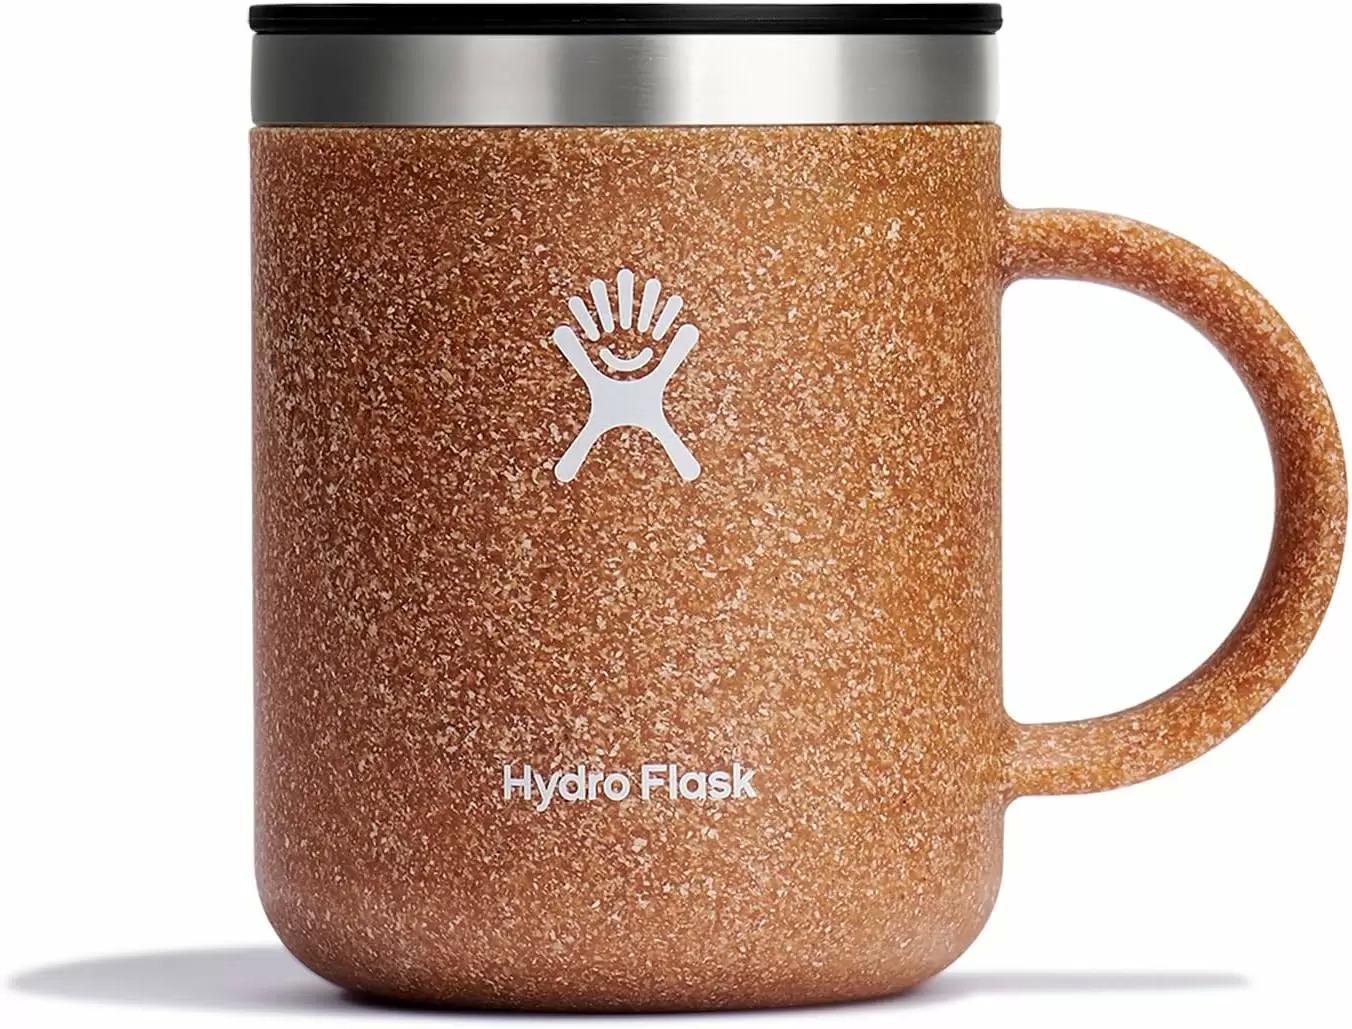 Hydro Flask Stainless Steel Vacuum Insulated Mug for $16.96